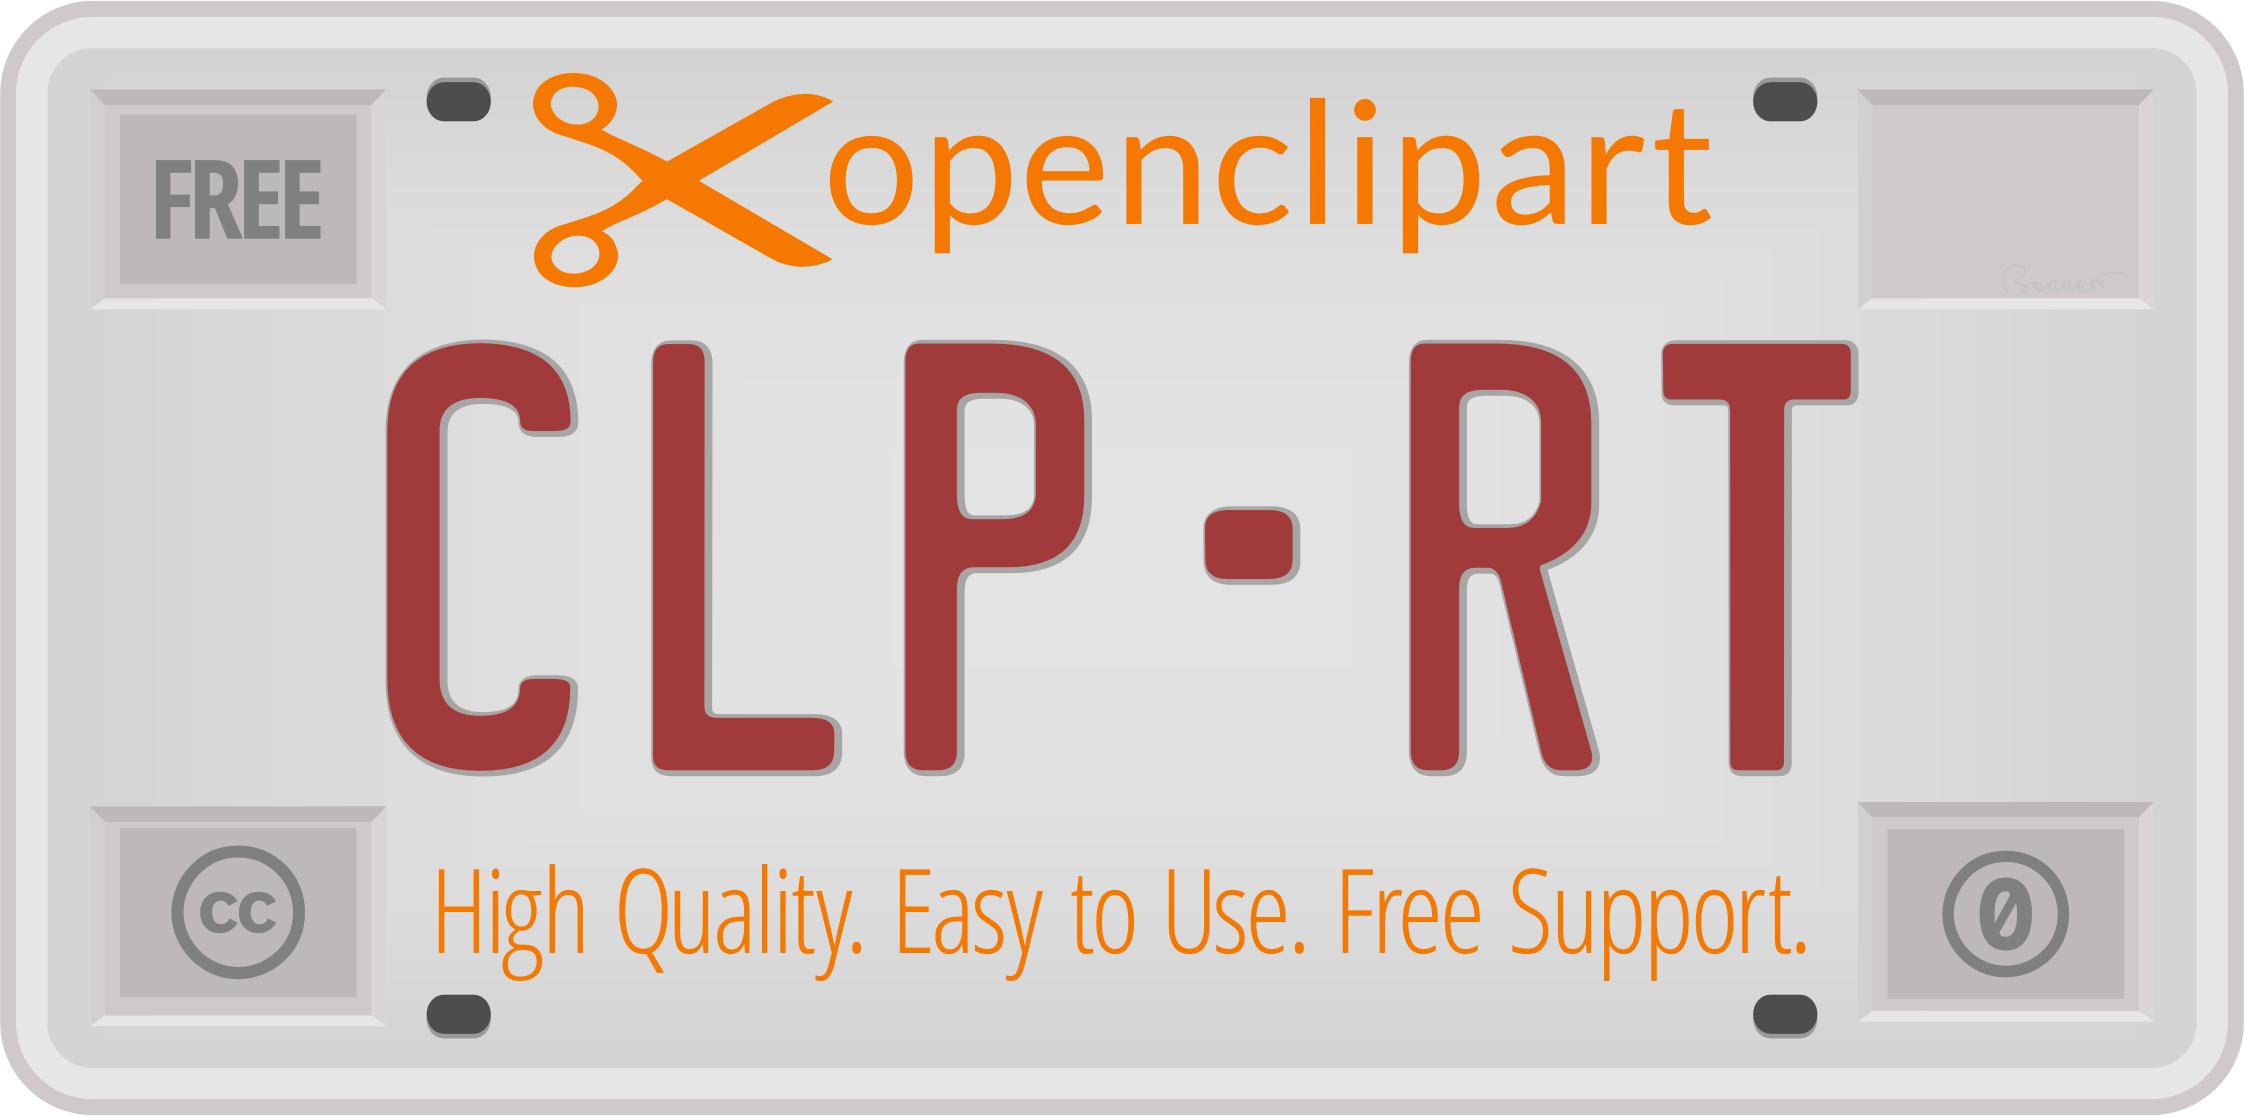 Openclipart License Plate png